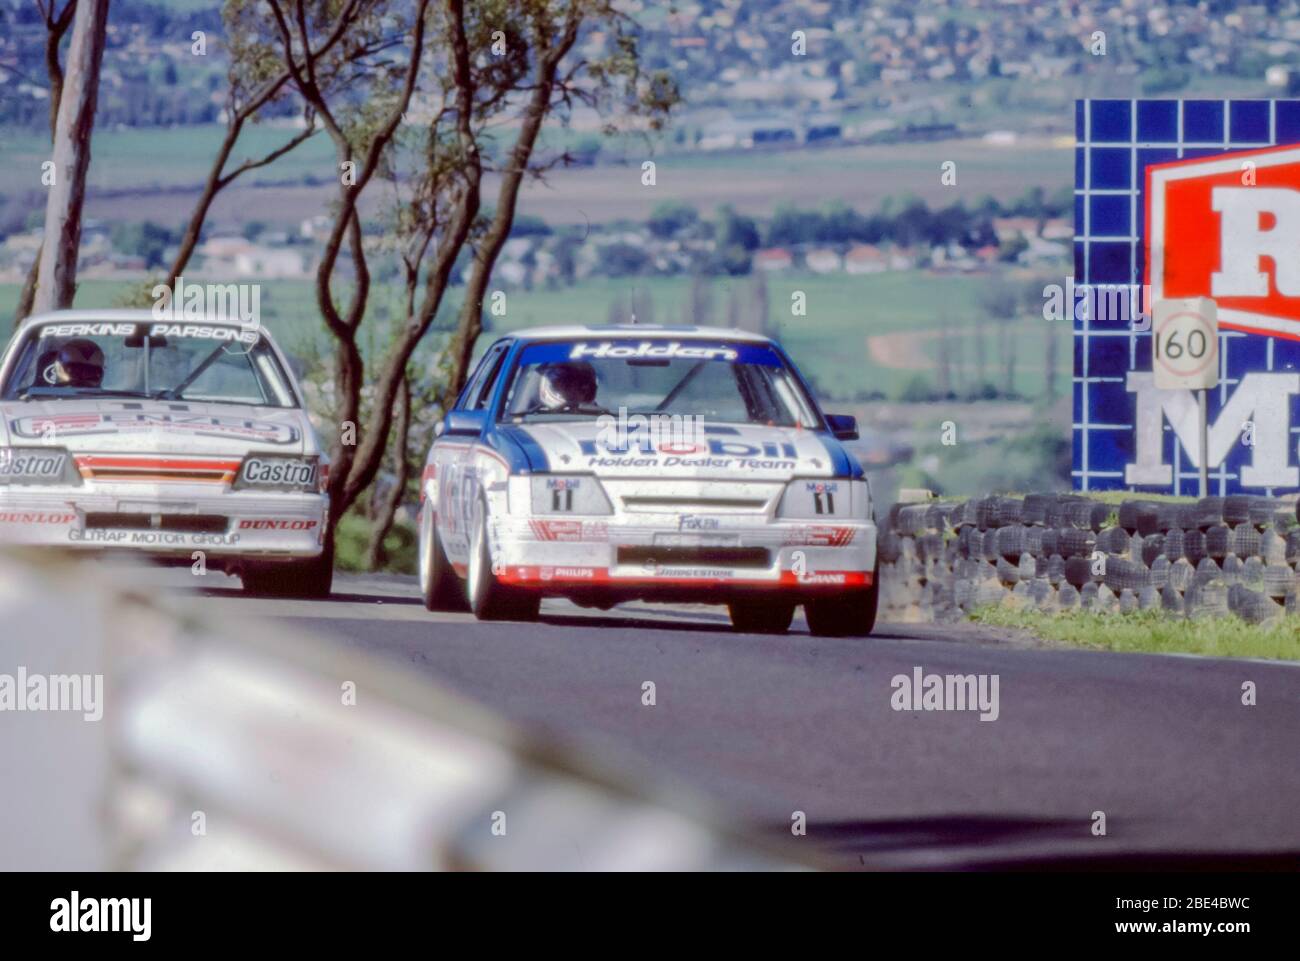 Bathurst, Australia, October 5th, 1986: Enzed Team Perkins, Holden VK Commodore SS Group A car, races with one of two Mobil Holden Dealer Team cars of the same model at the 1986 James Hardie (Bathurst) 1000 race. The cars are pictured on part of the steep uphill section of the 6.213km street circuit Stock Photo